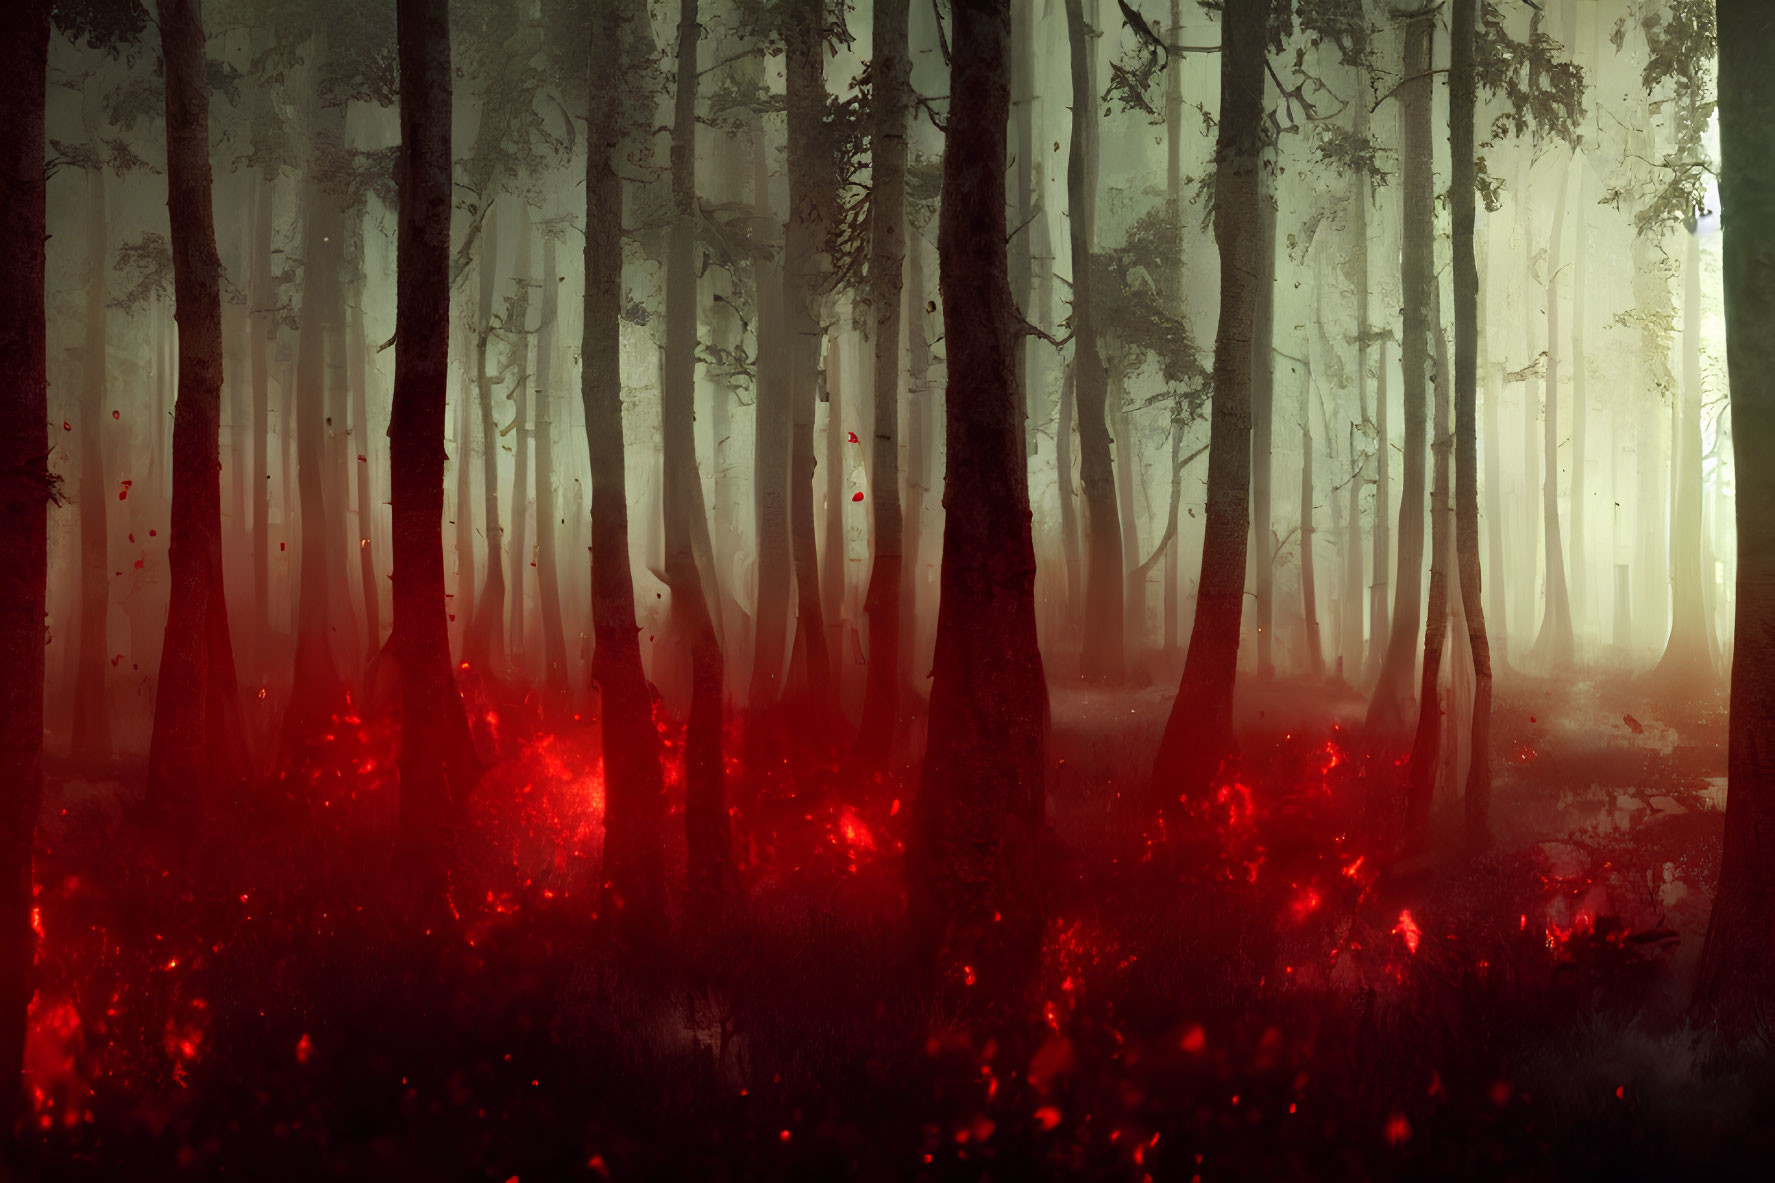 Mystical forest with slender trees in fog and red glow